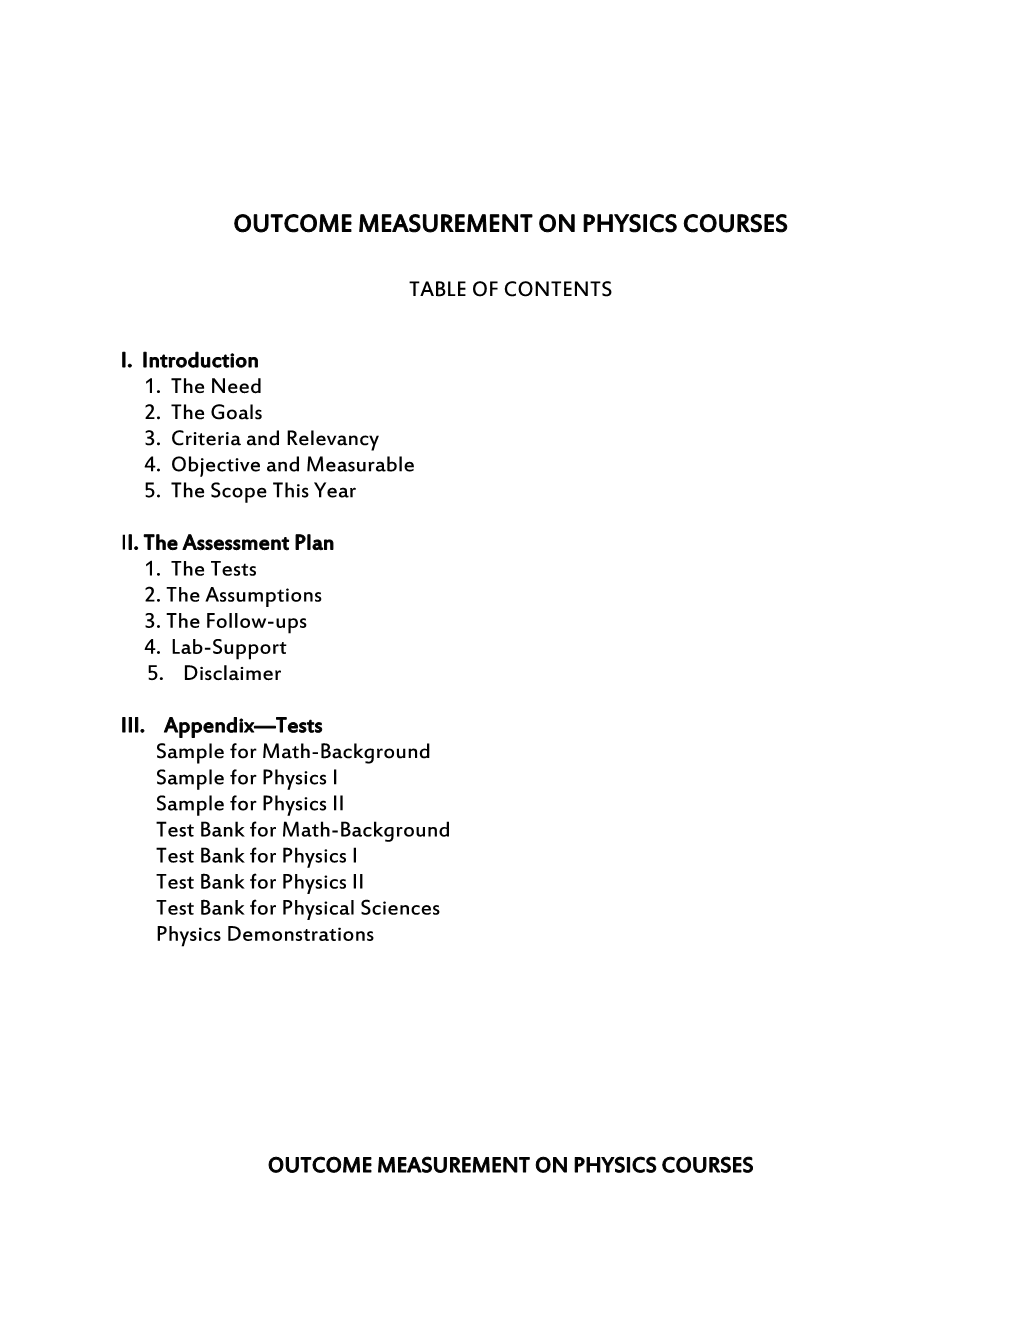 Outcome Measurement on Physics Courses